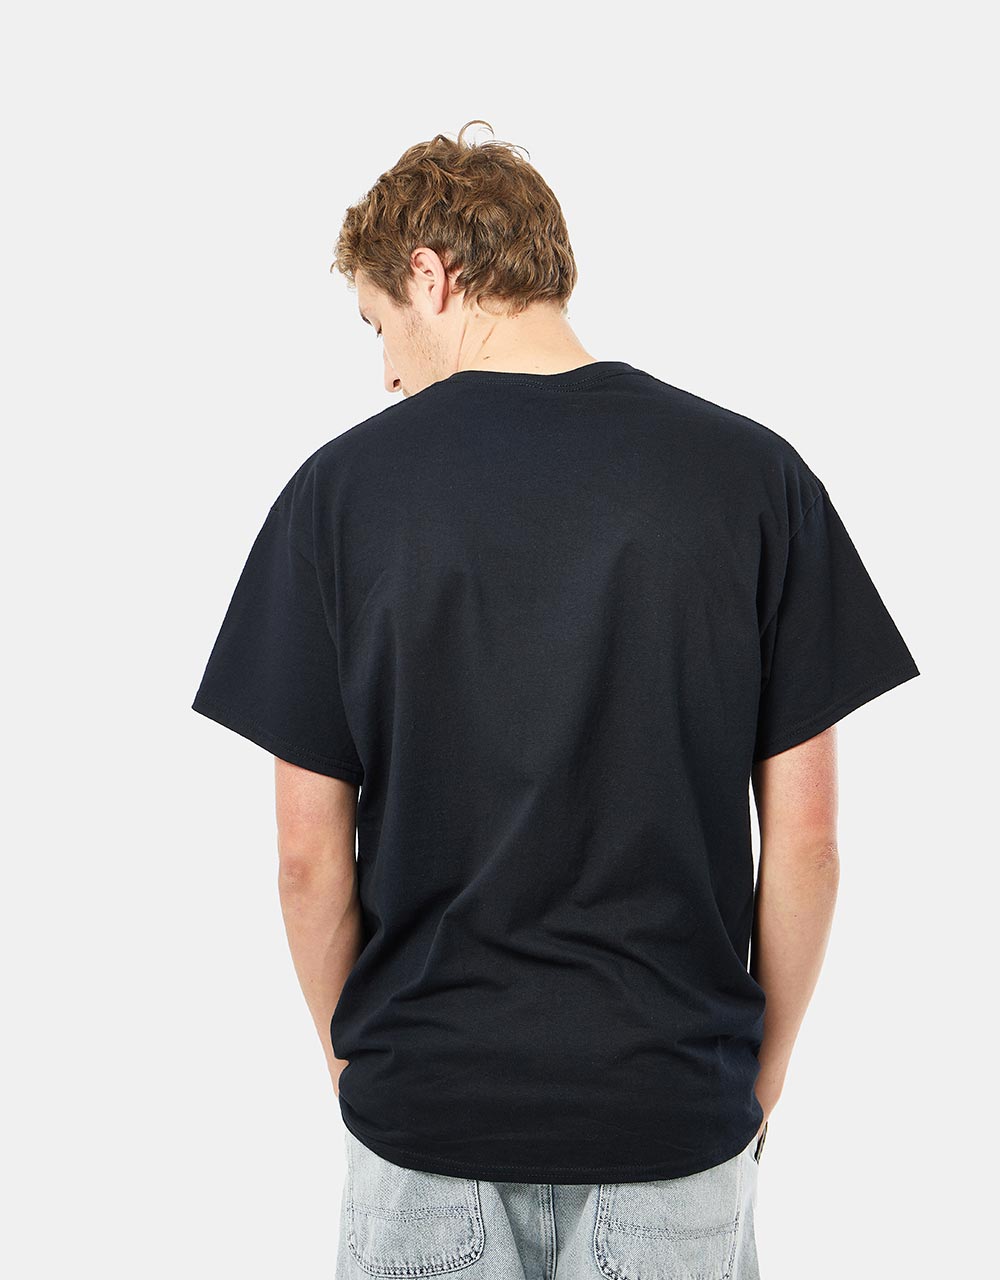 Welcome Jester T-Shirt - Black